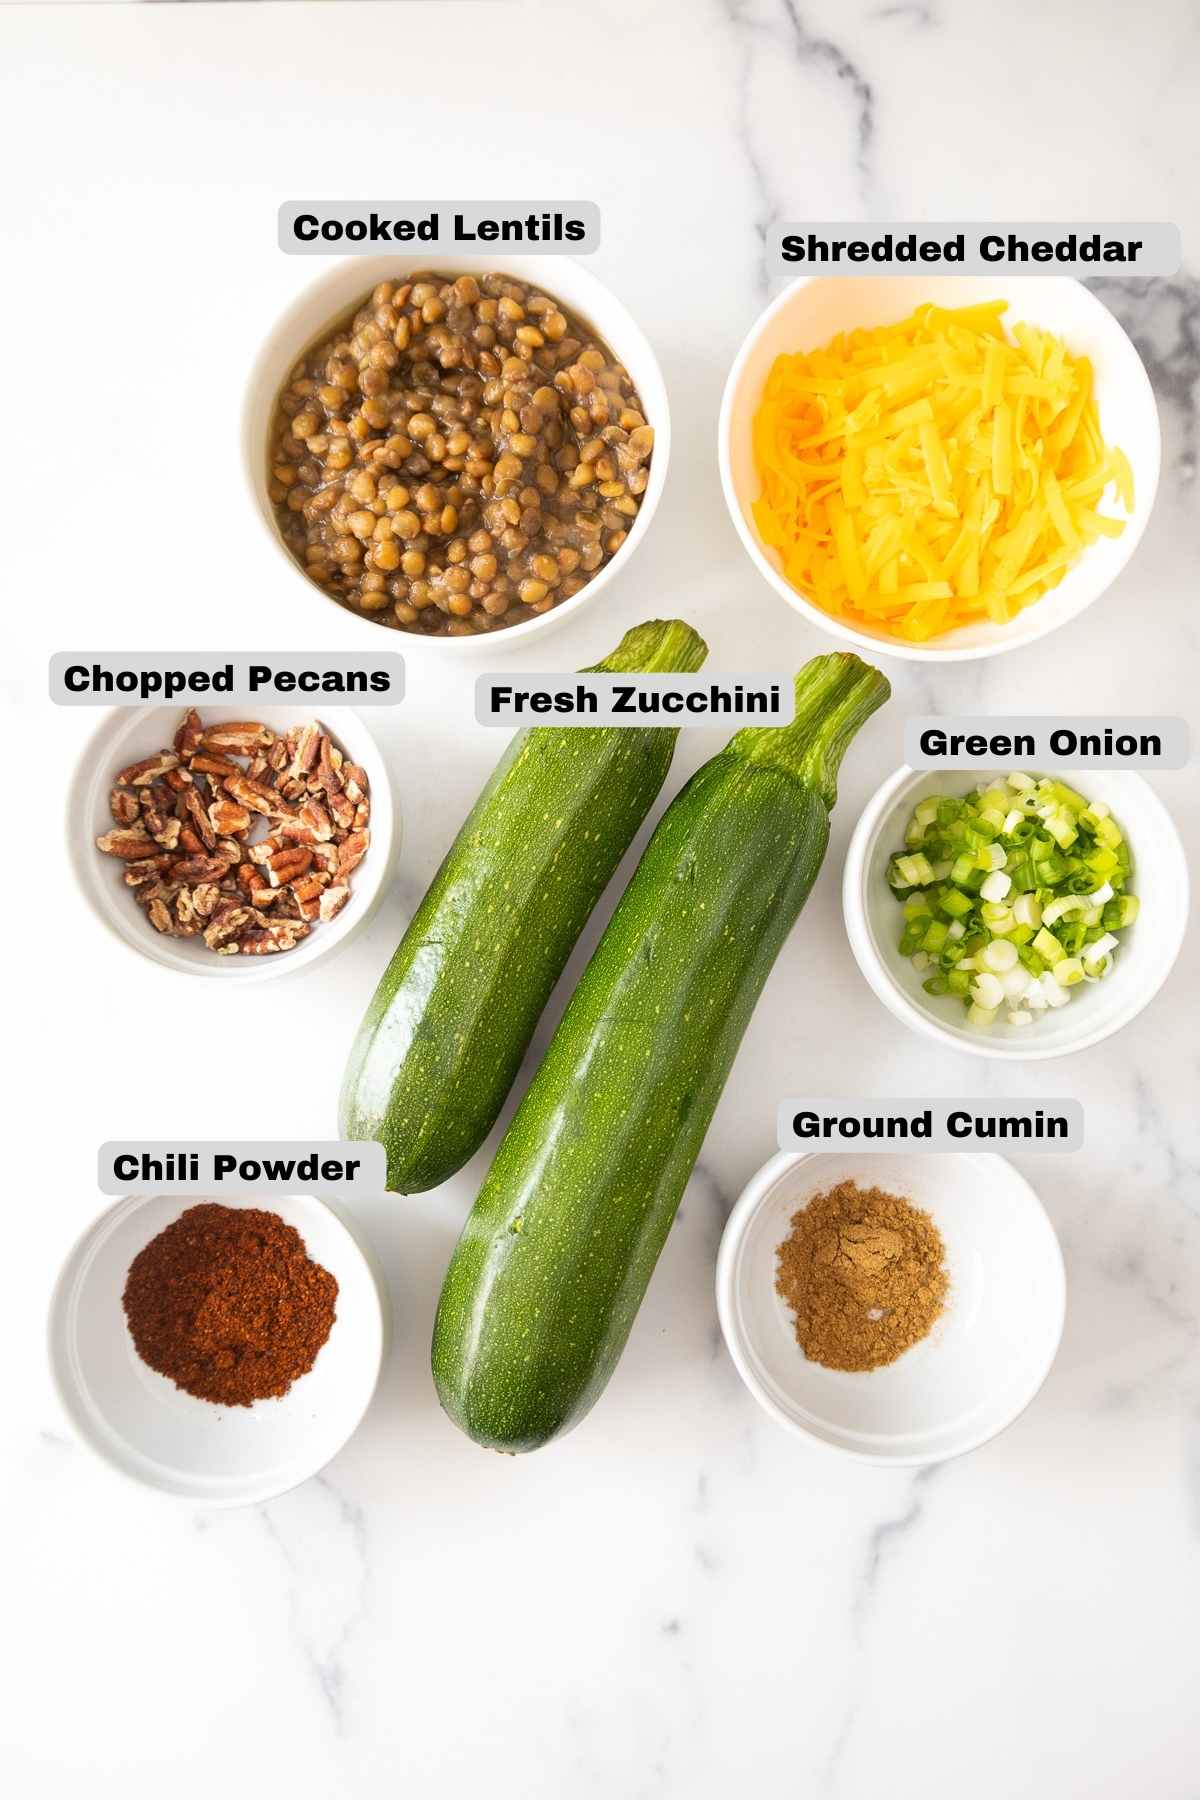 Ingredients for zucchini recipe.